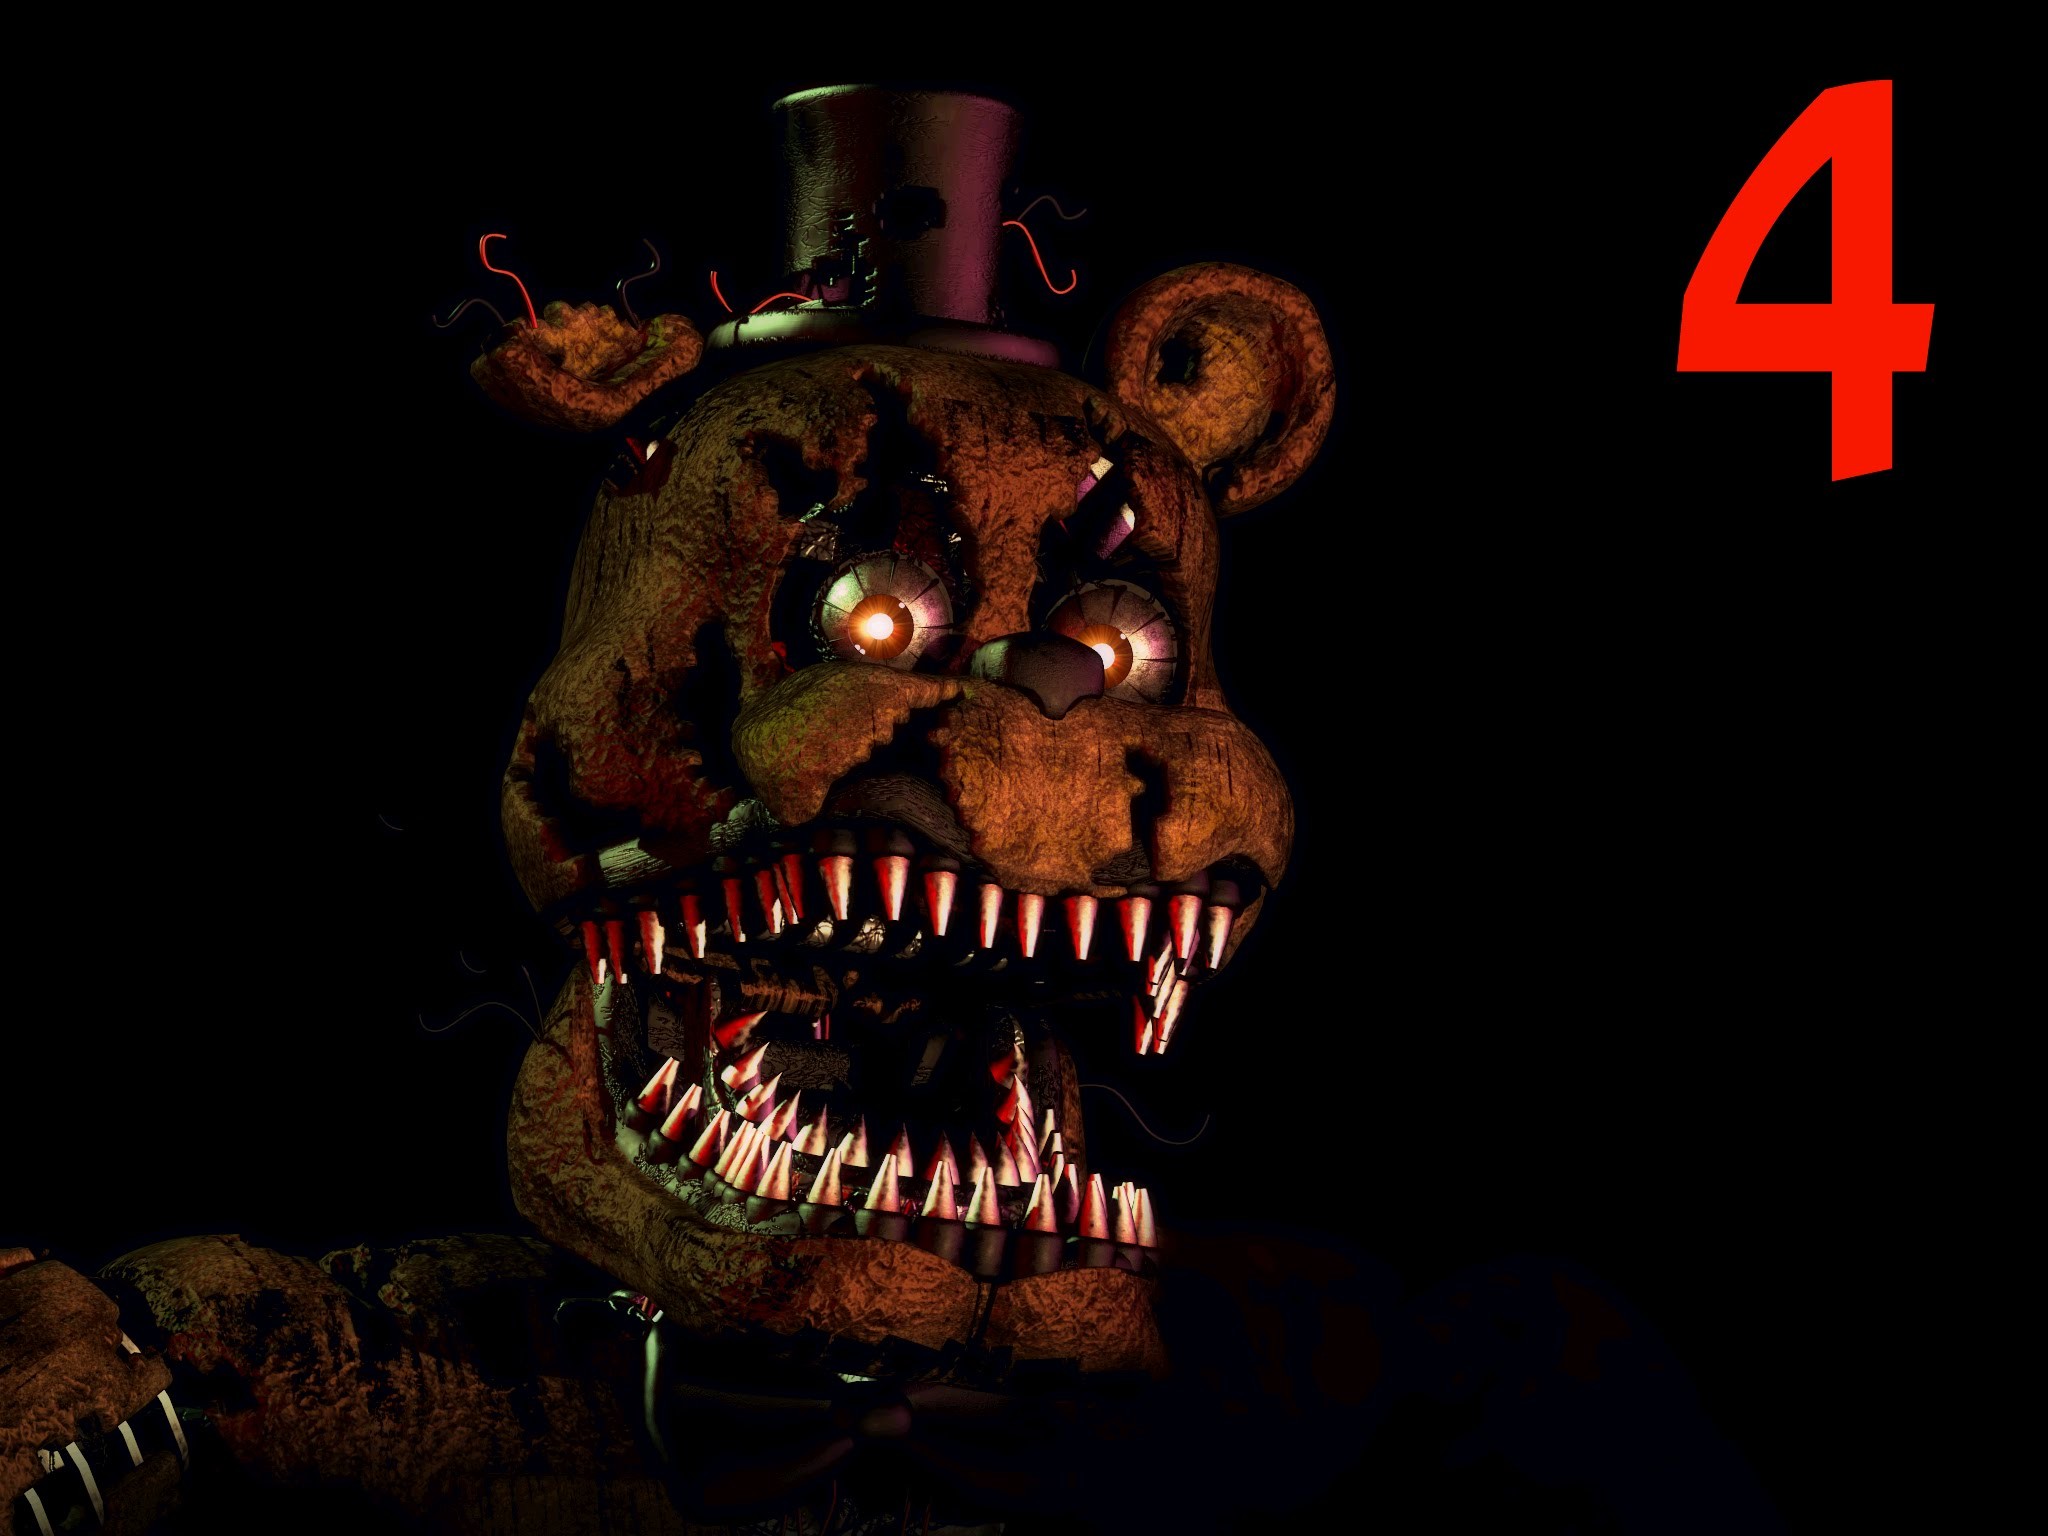 Fnaf 4 IOS is out! 